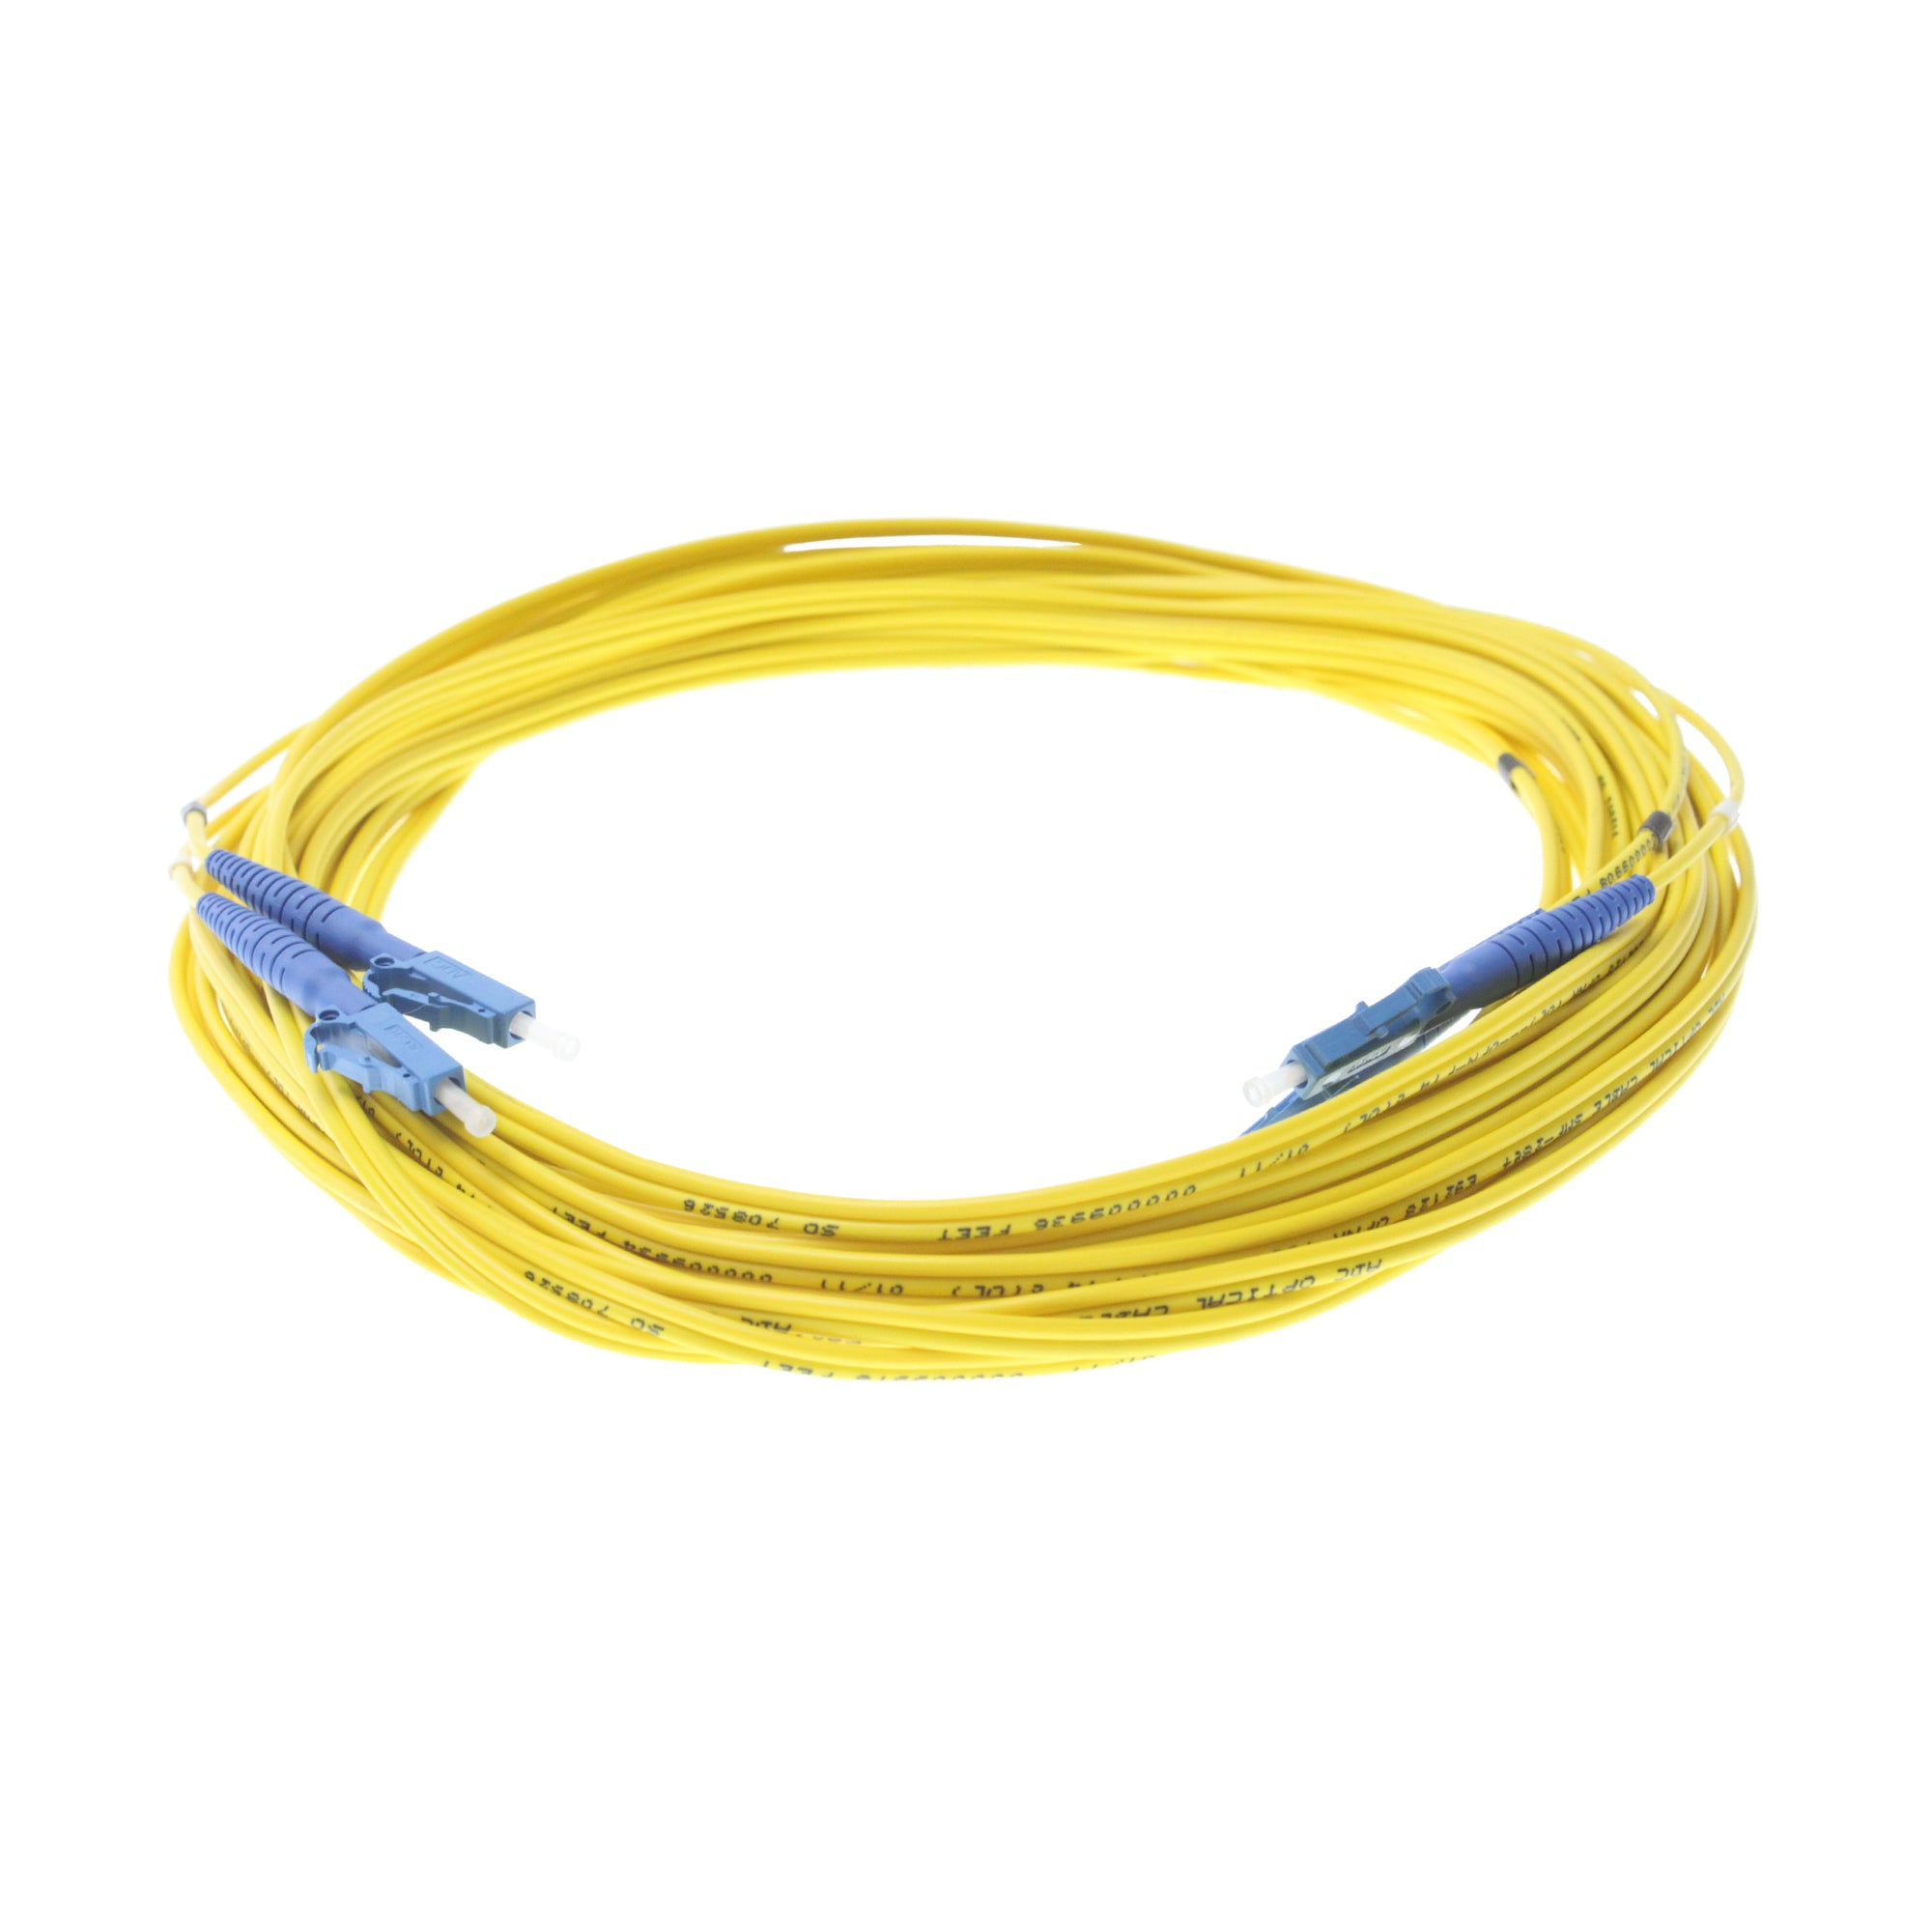 ADC TeleCommunications, ADC FPC2-SPLC-10M SINGLE MODE LC-LC DUPLEX FIBER OPTIC PATCH CORD CABLE